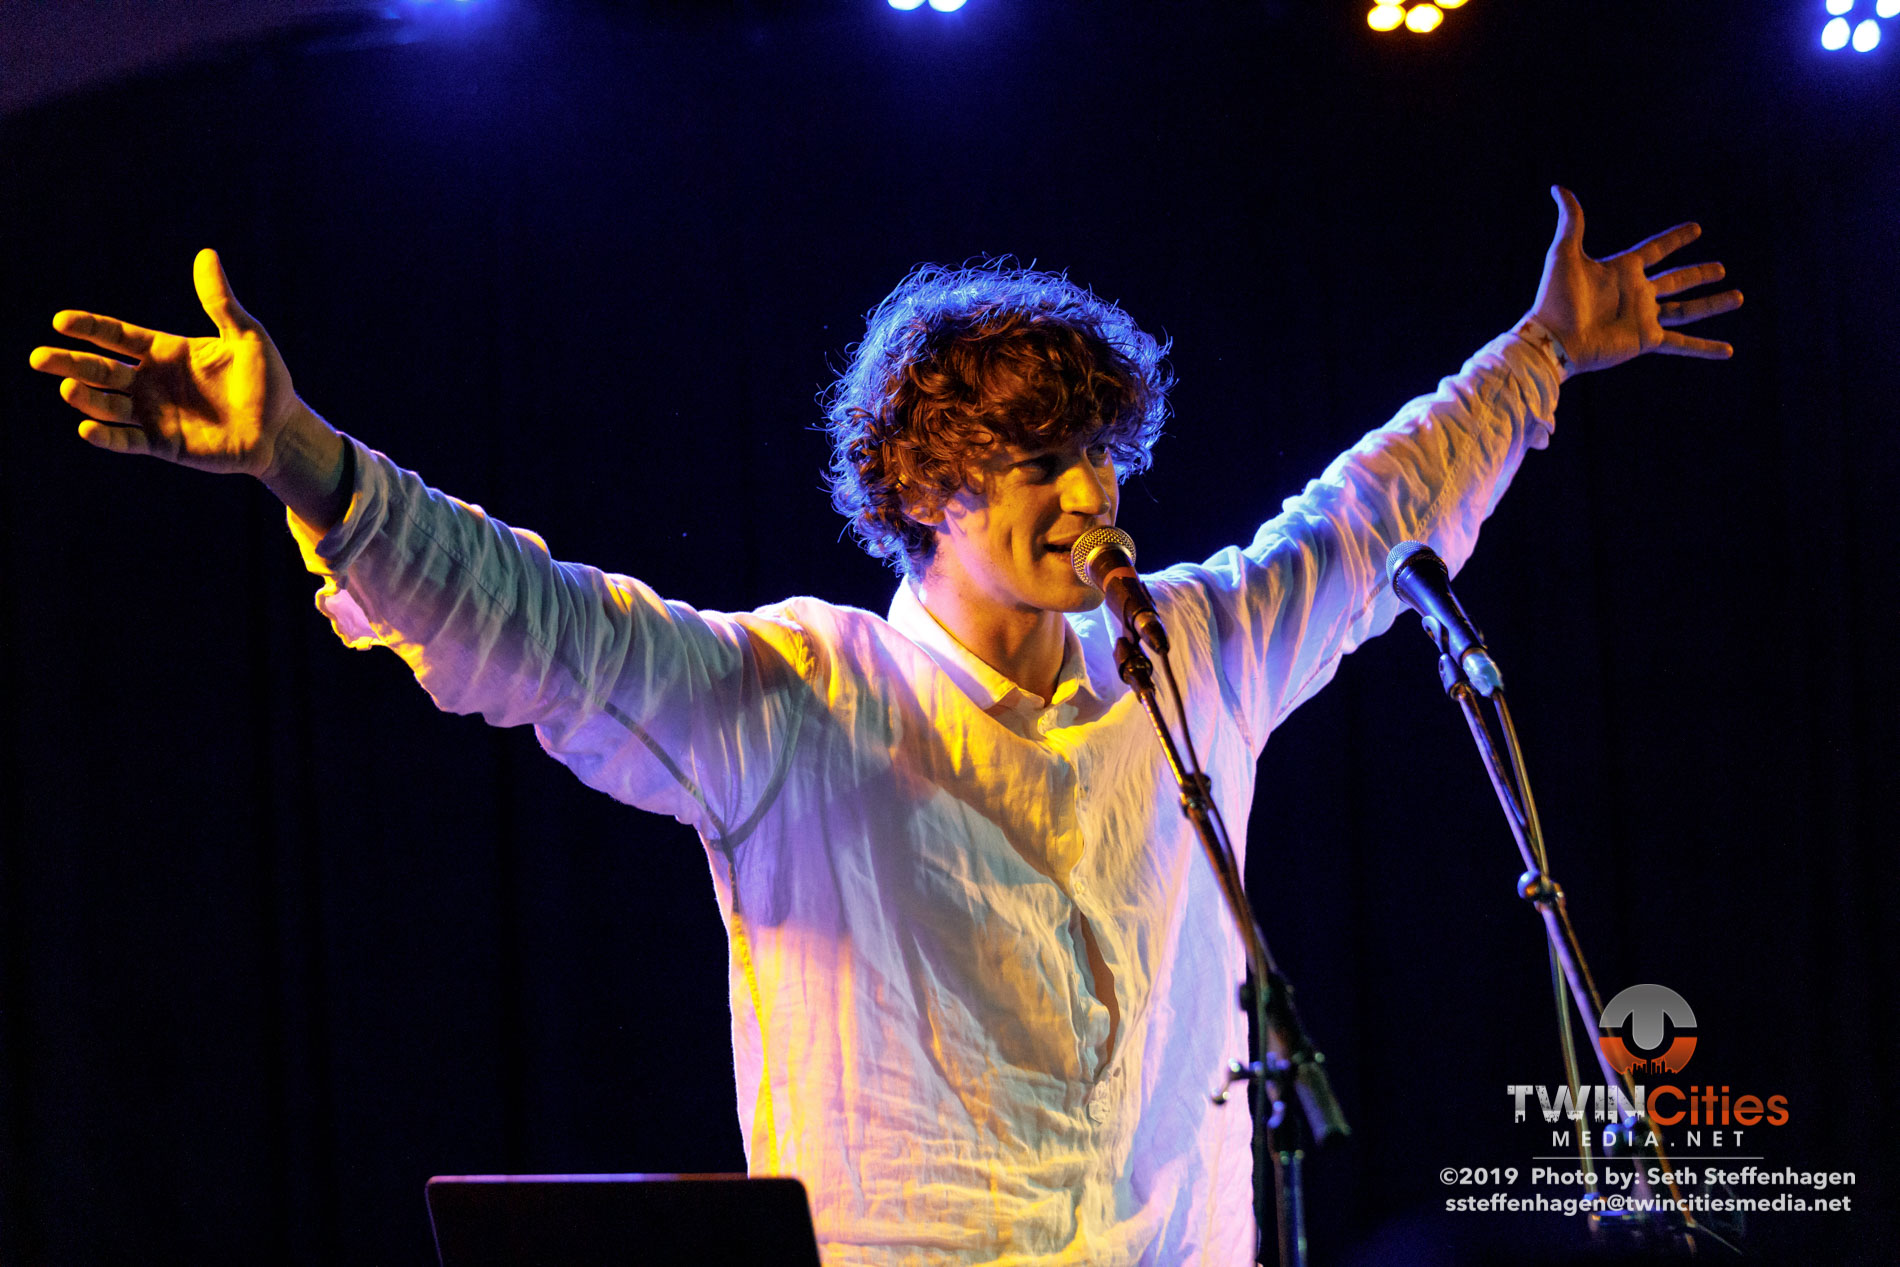 October 2, 2019 - Minneapolis, Minnesota, United States - Cosmo Sheldrake live in concert at the 7th Street Entry  along with altopalo as the openers.(Photo by Seth Steffenhagen/Steffenhagen Photography)